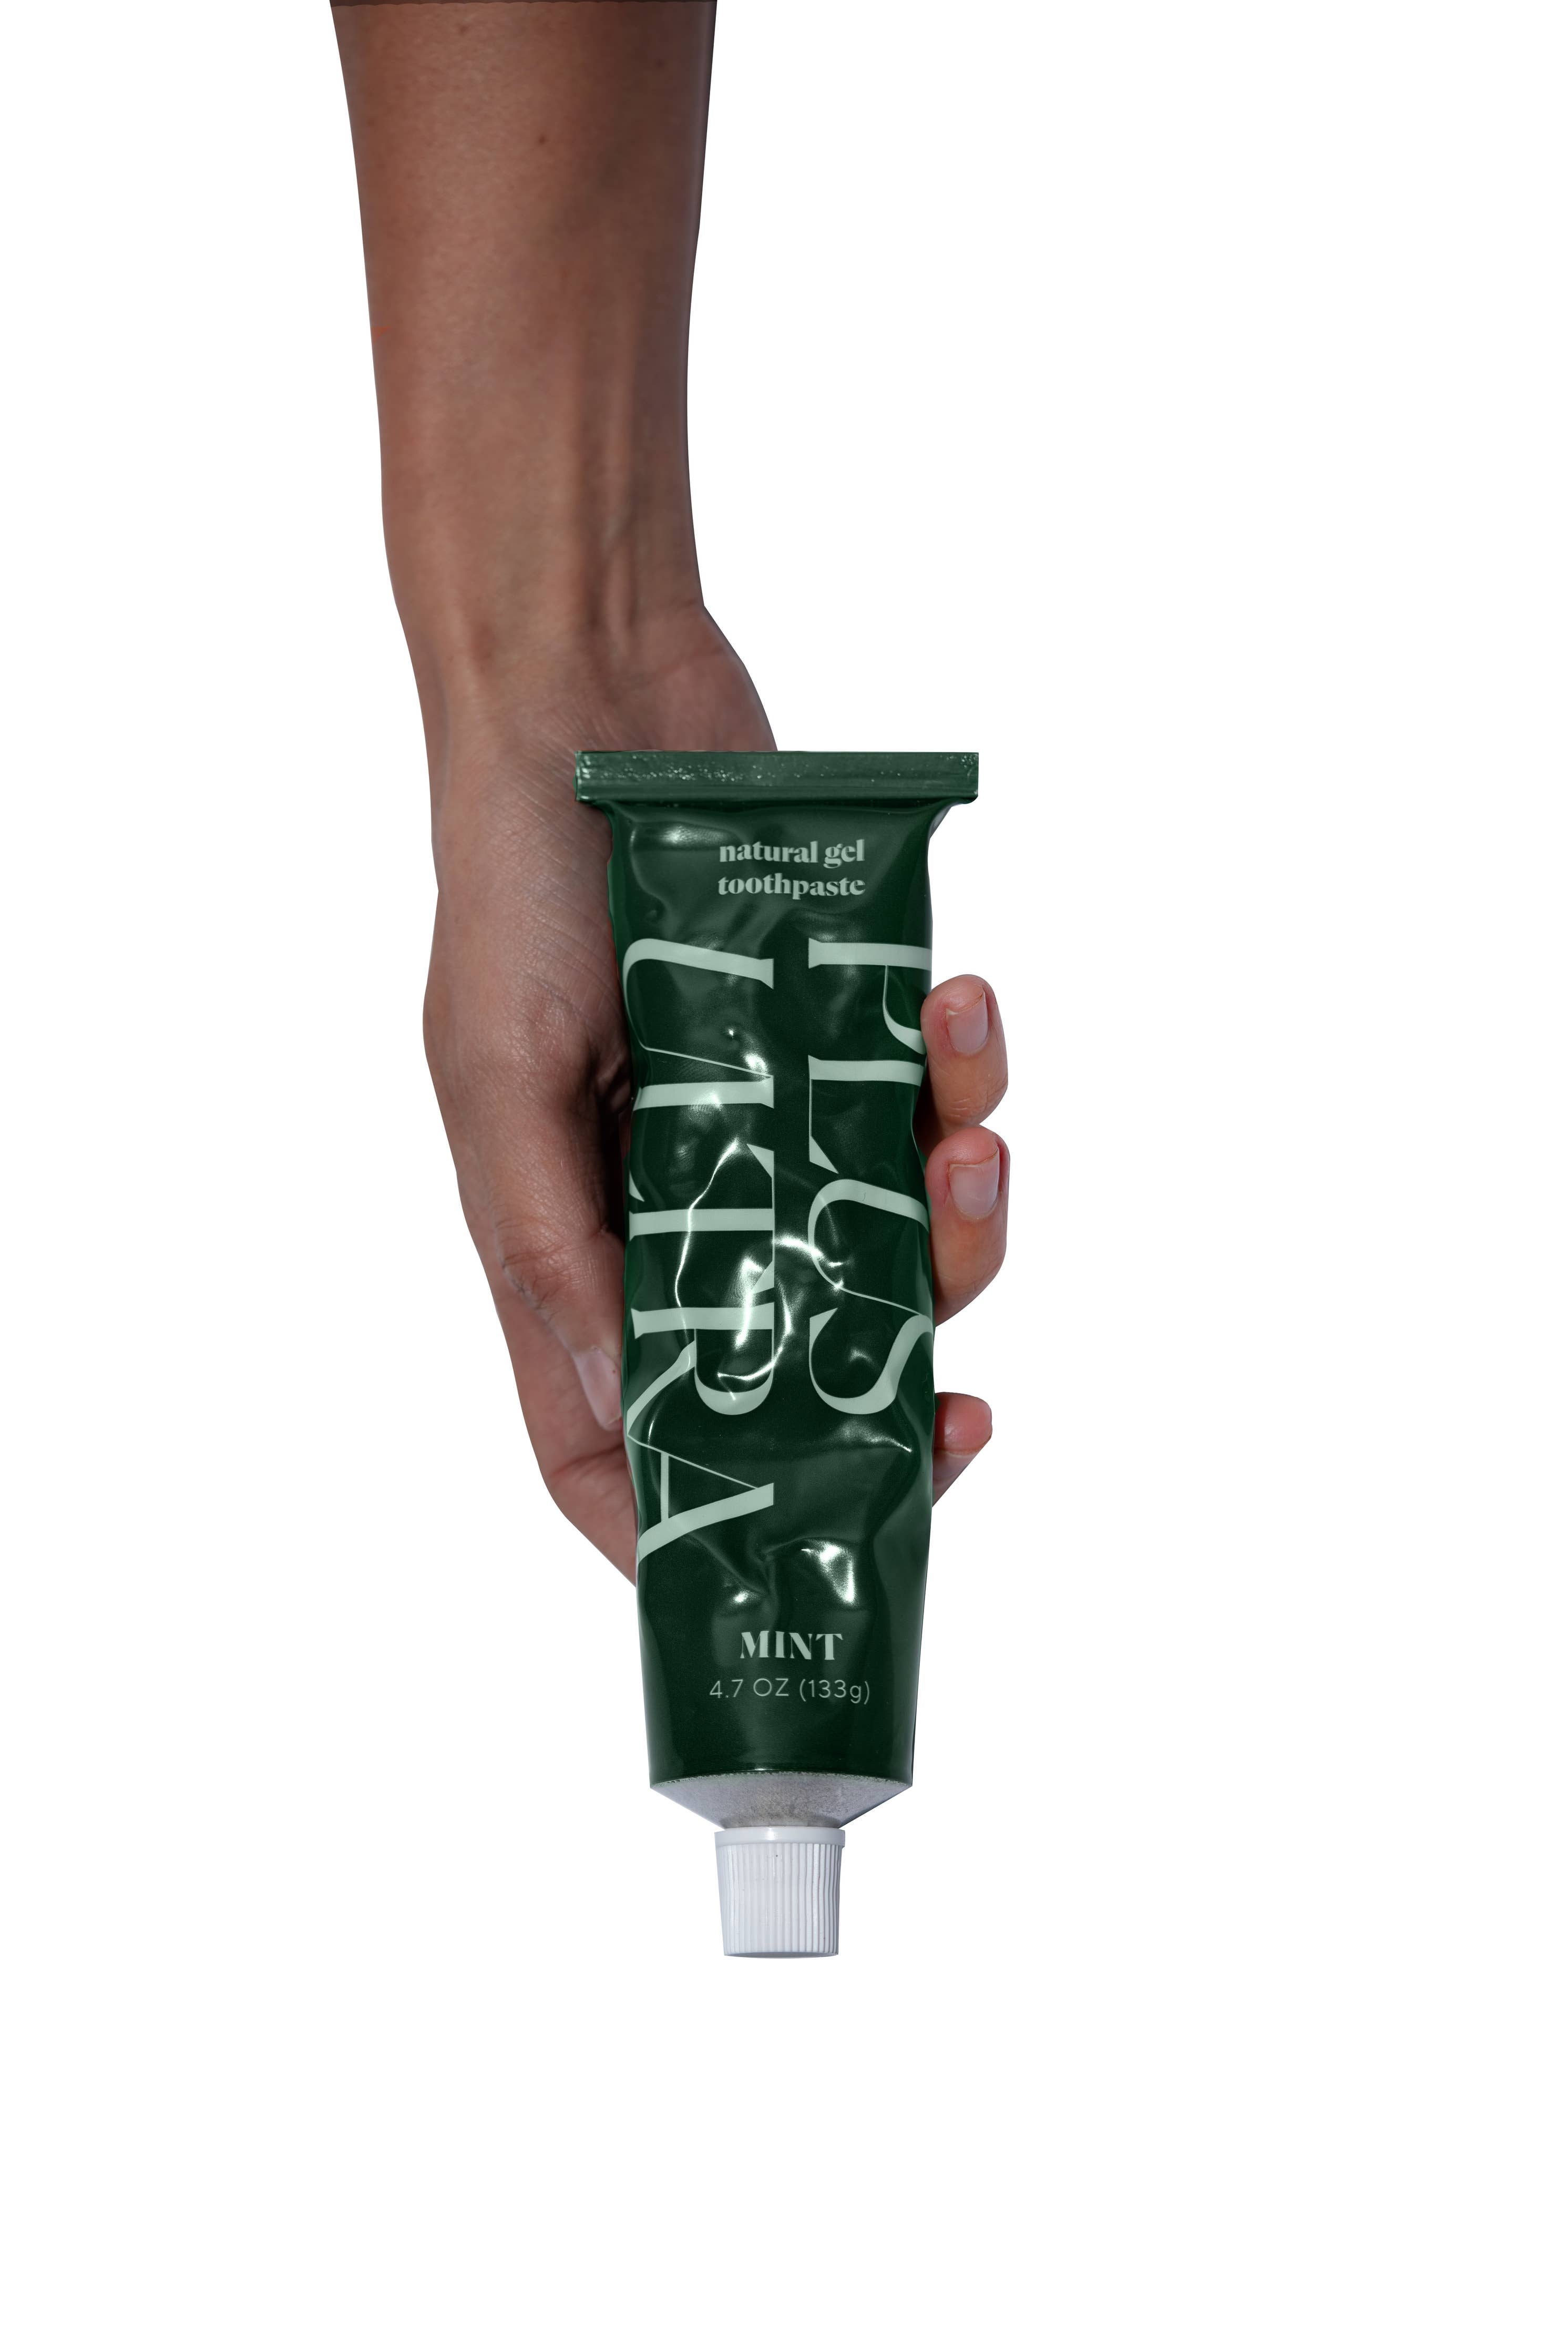 All Natural Gel Toothpaste